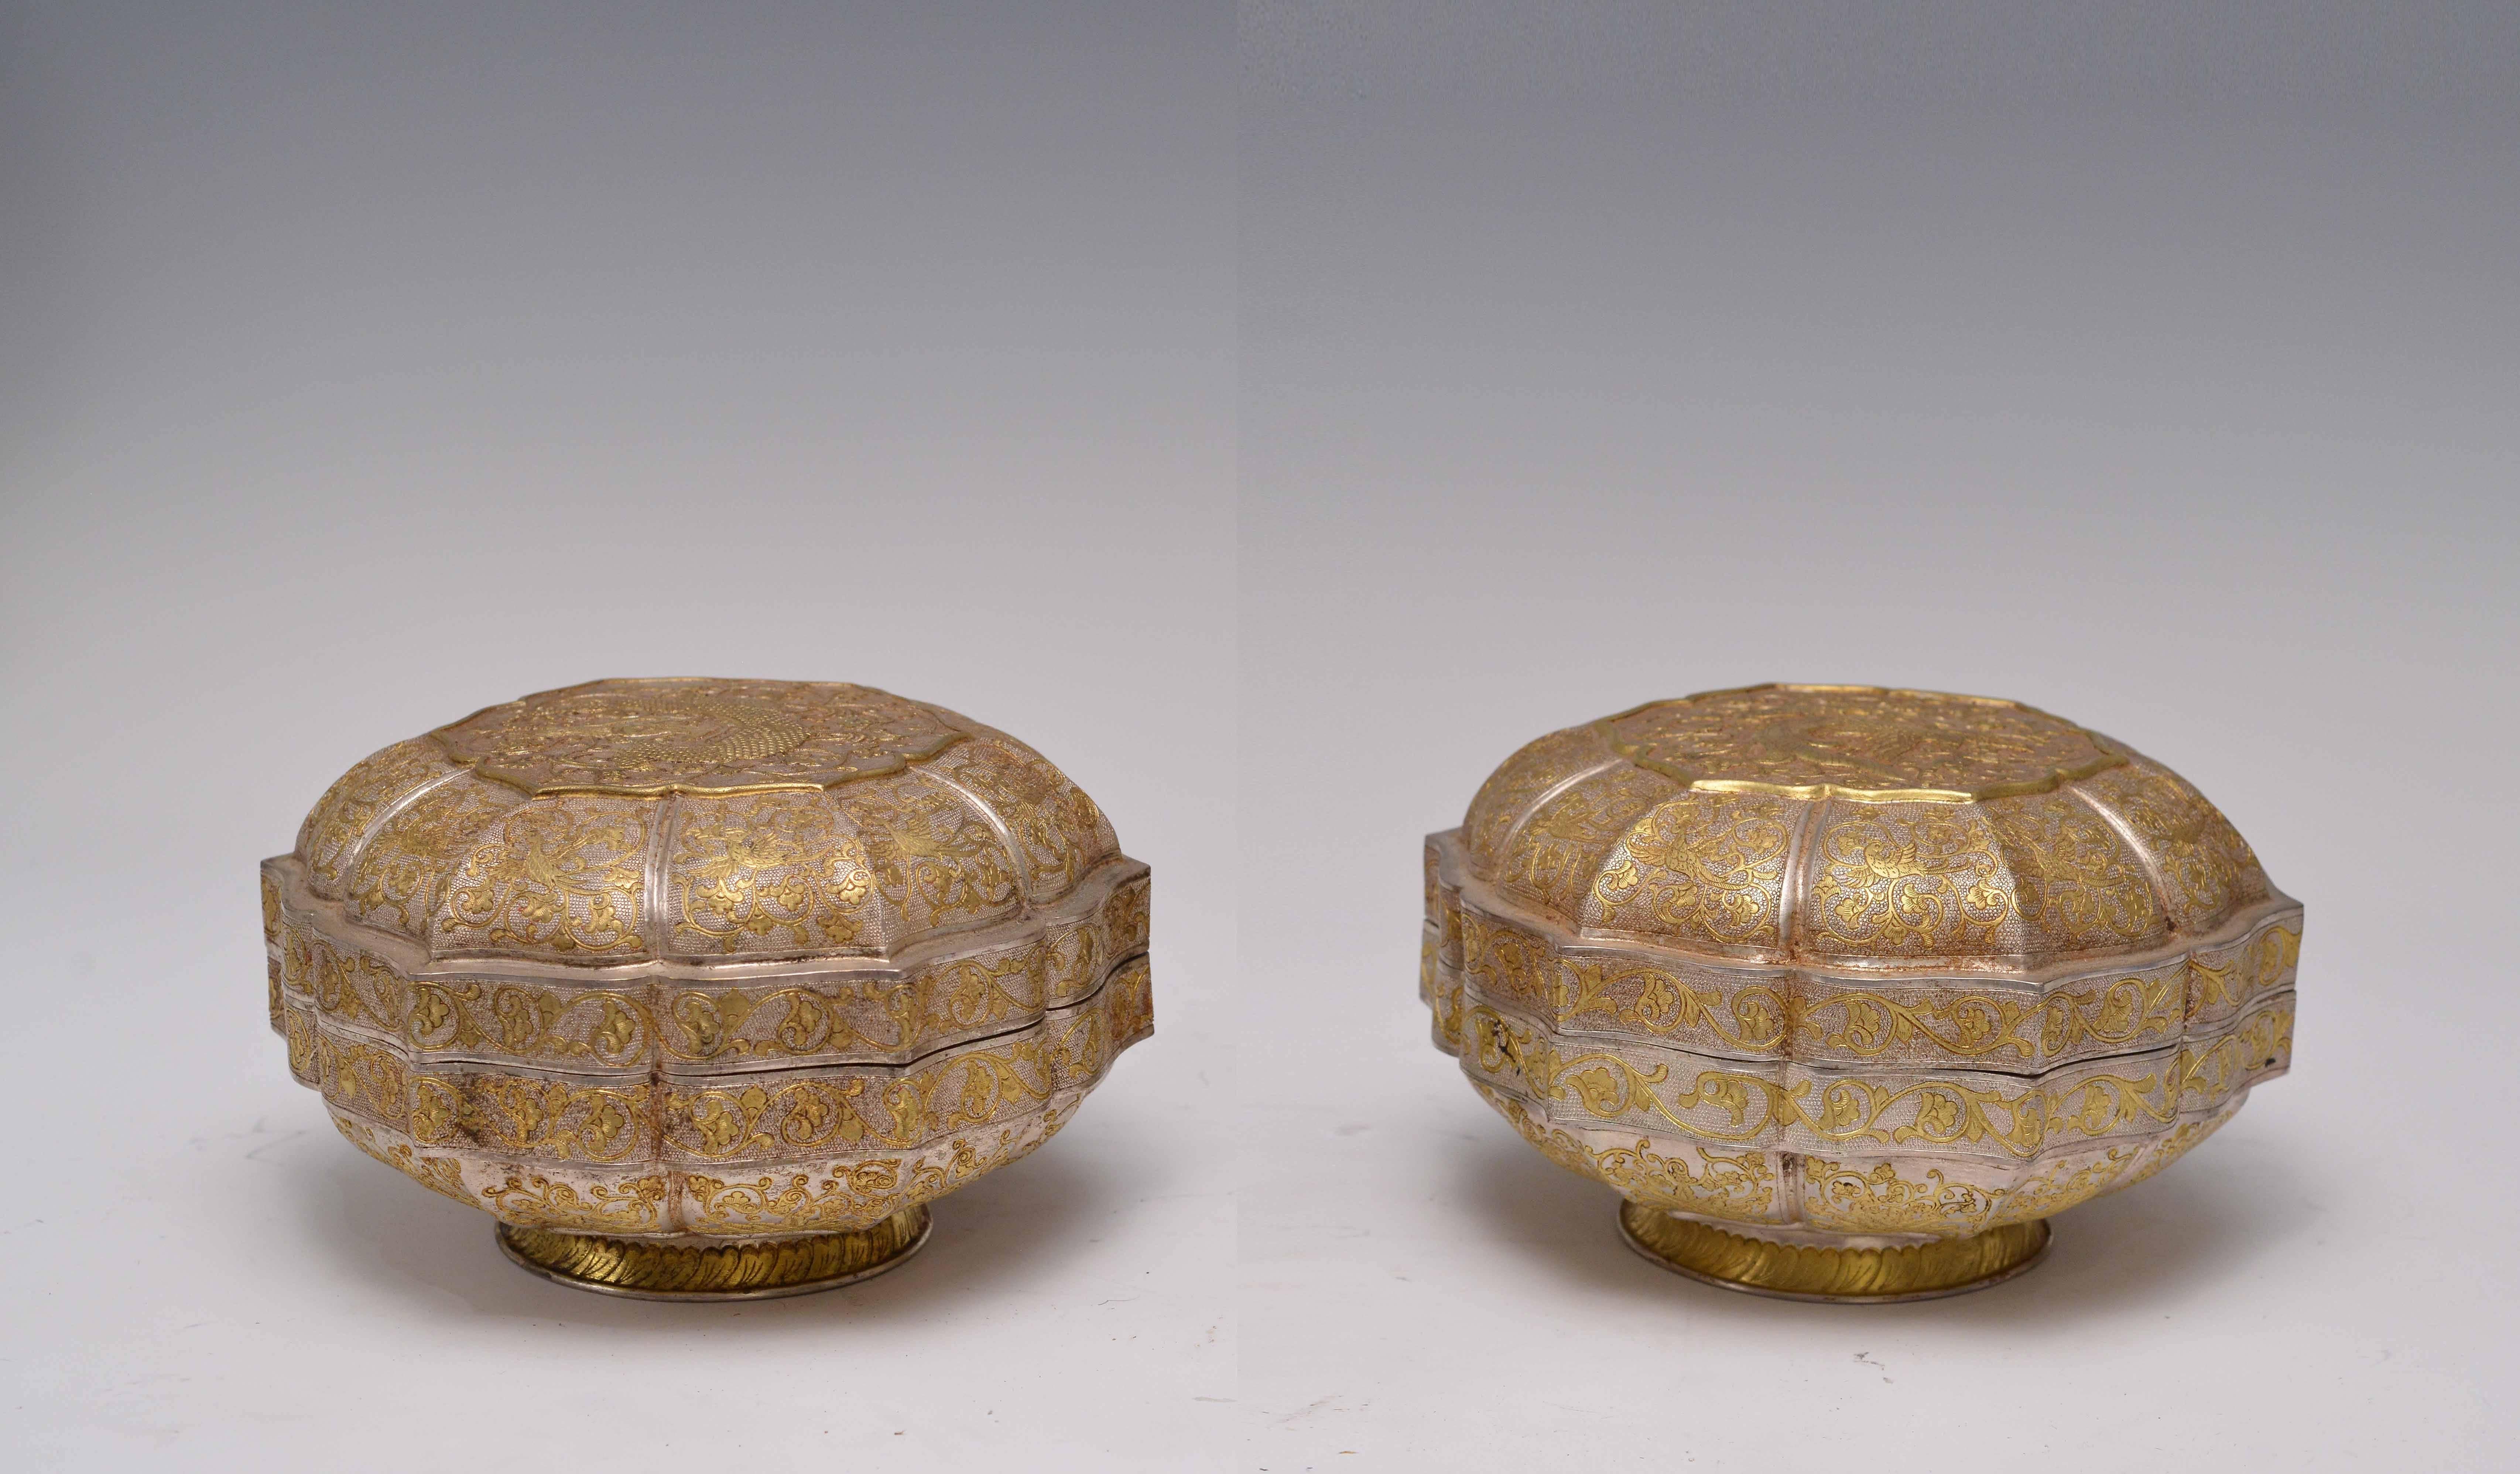 Fine repousse parcel-gilt and silvered copper boxes with dragon and phoenix decorations. From northern part of China, circa 1920.
